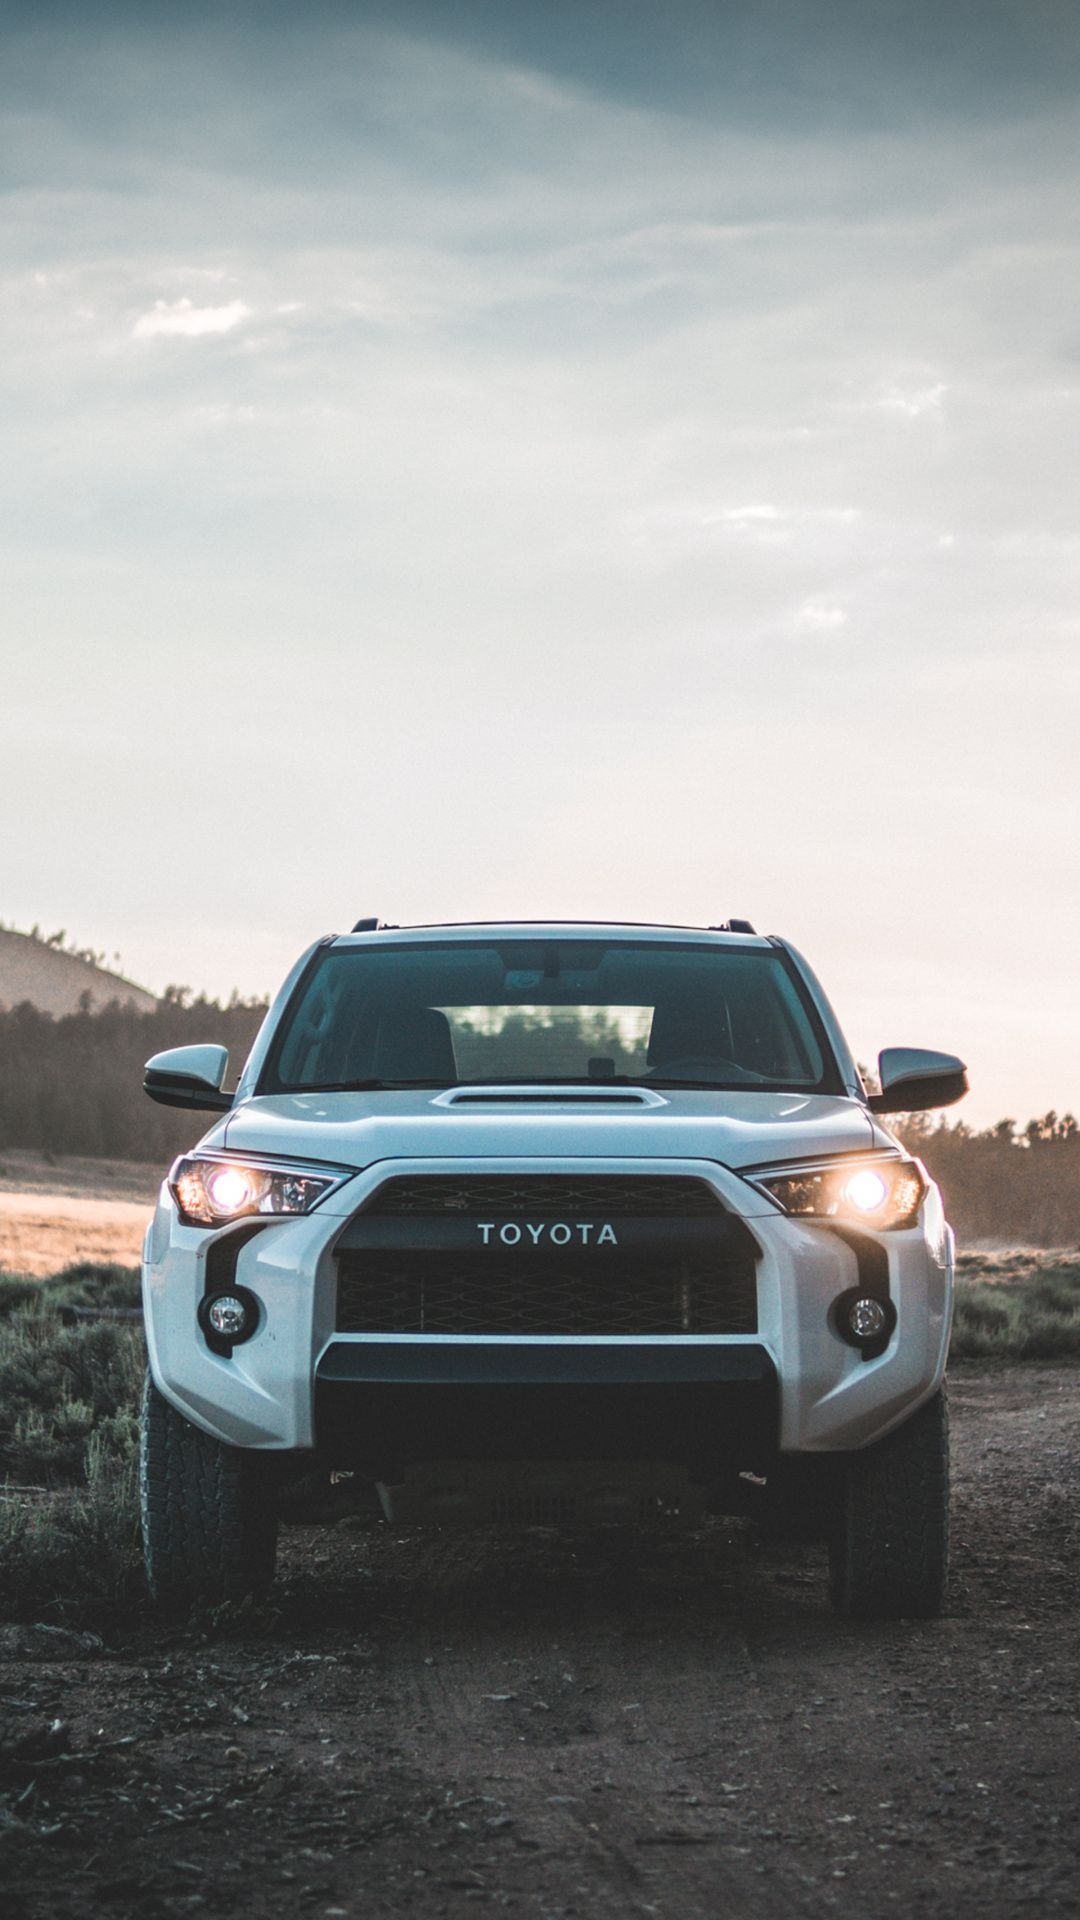 Toyota Tundra, Stunning iPhone wallpapers, Captivating images, Trd sport, 1080x1920 Full HD Handy